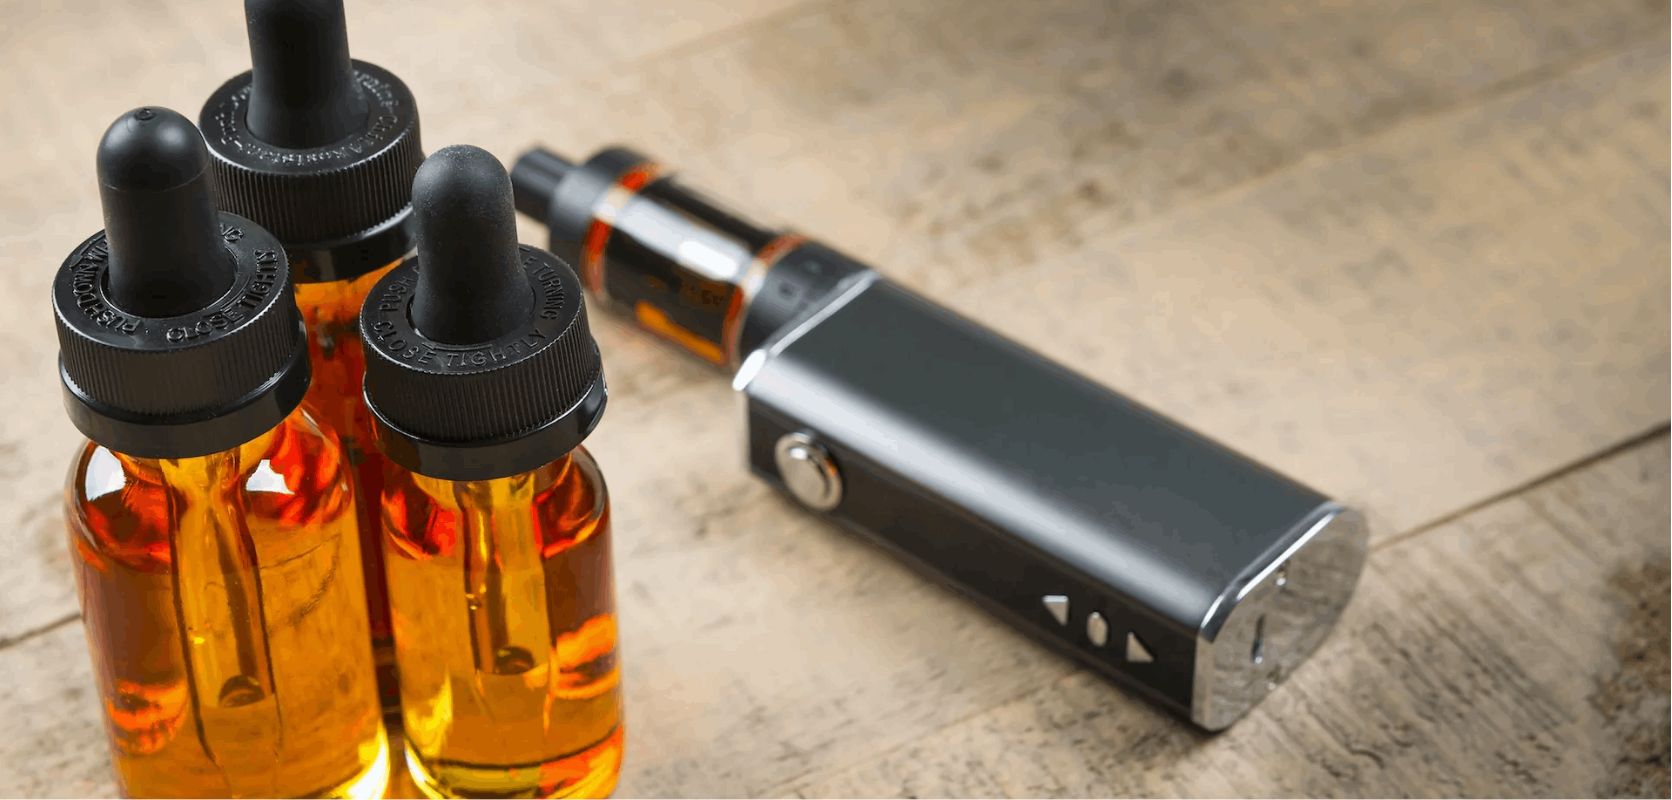 The process can be done in a few easy steps. Here's a step-by-step guide on how to use THC vape oi the right way: